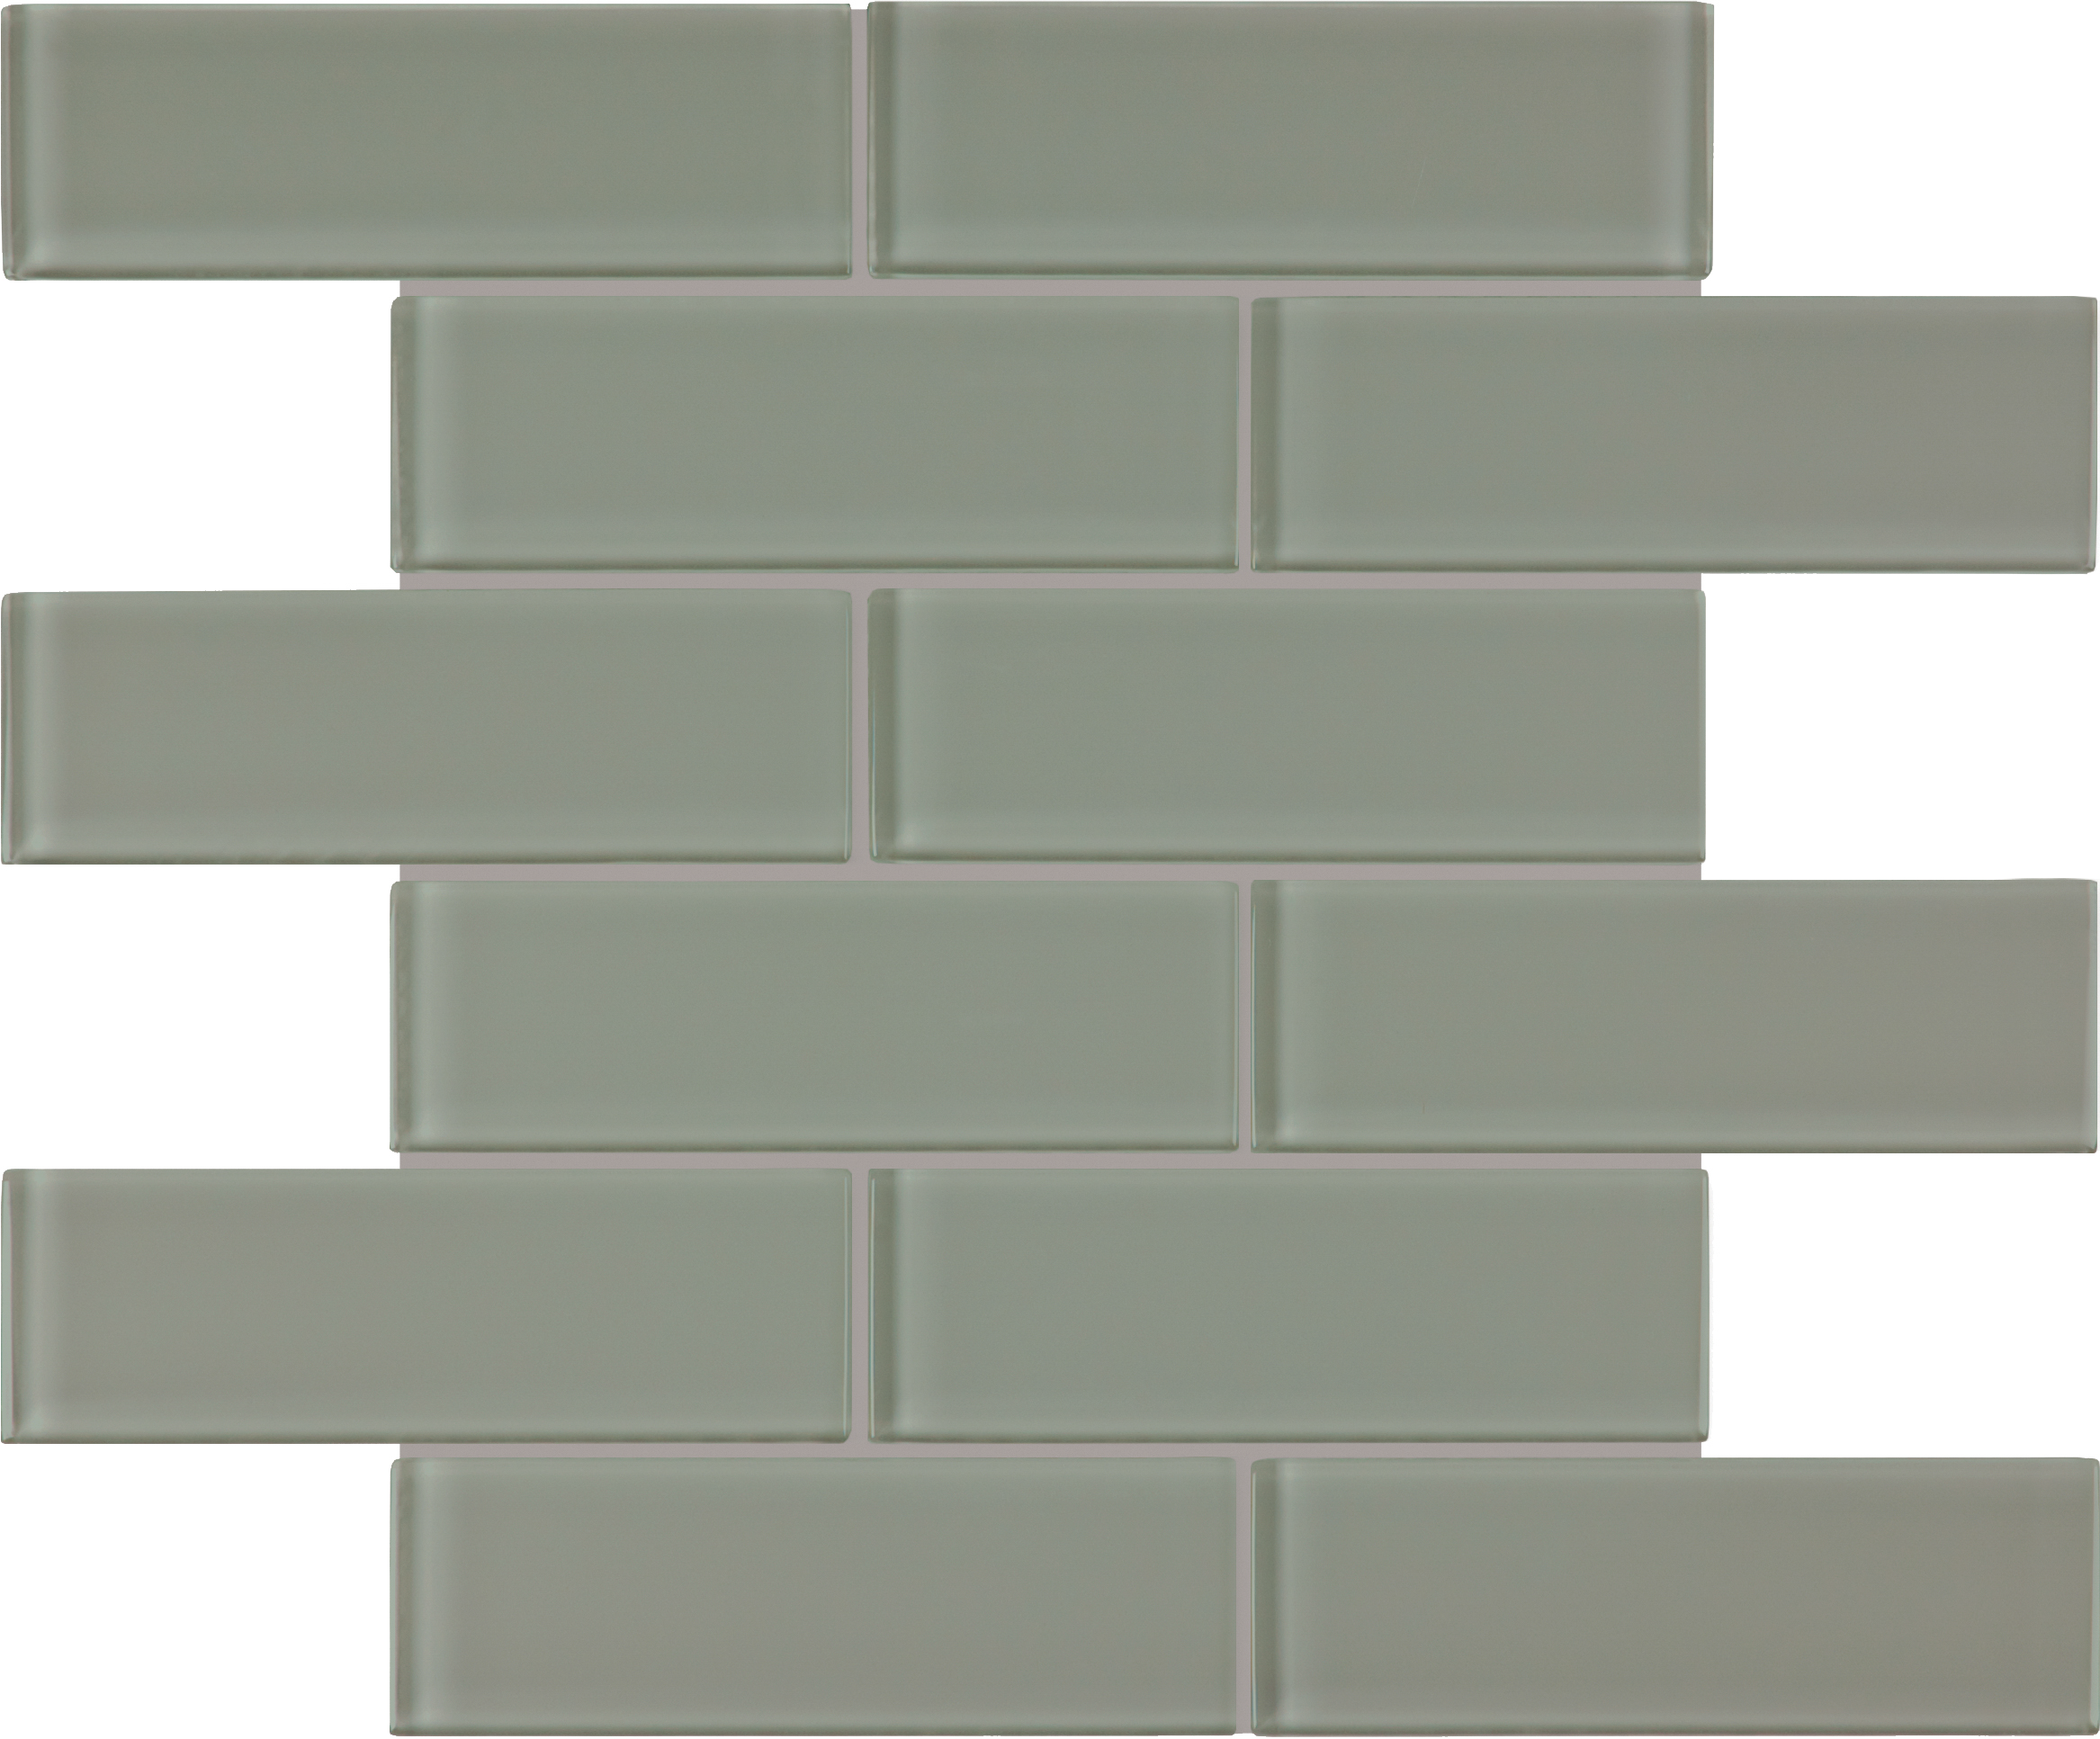 smoke brick offset 2x6-inch pattern fused glass mosaic from element anatolia collection distributed by surface group international glossy finish rounded edge mesh shape